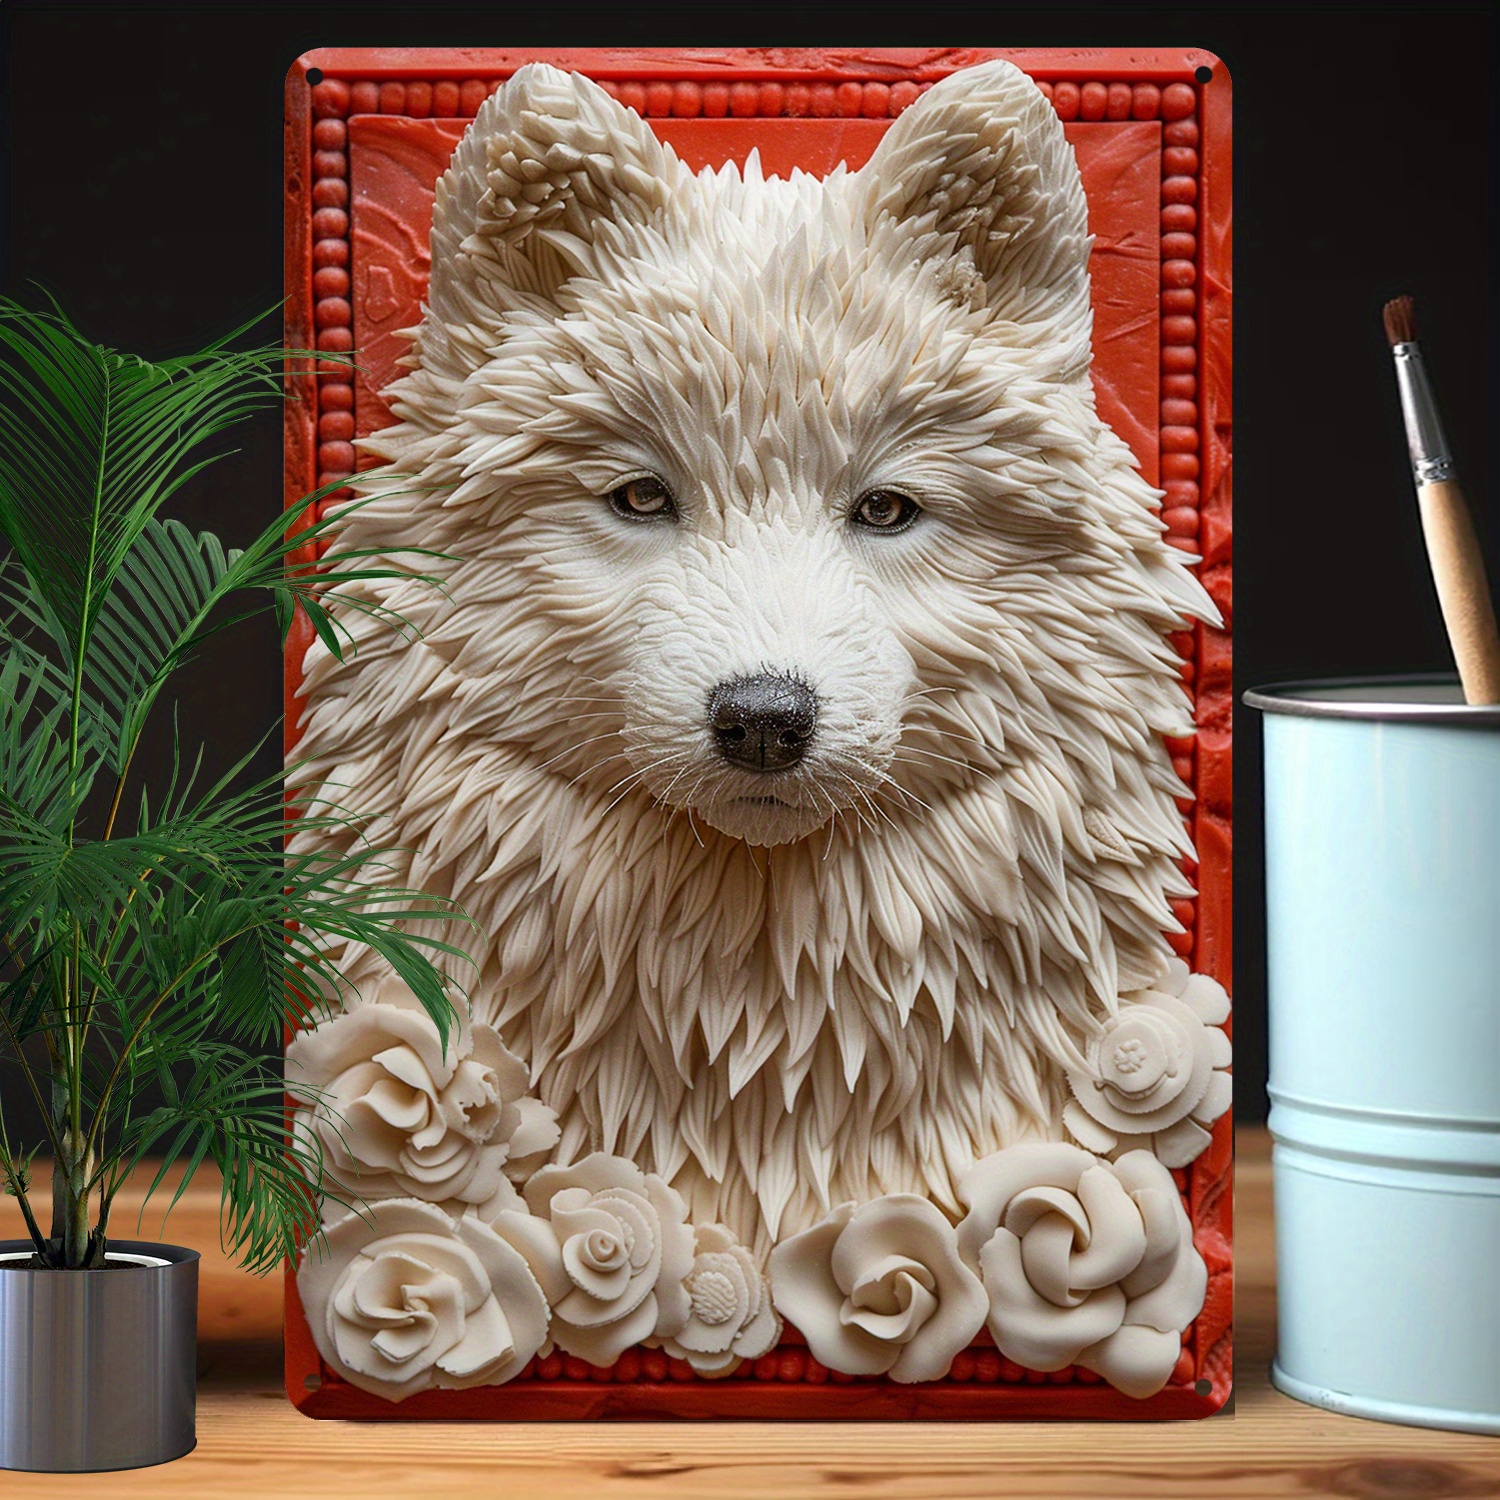 

Samoyed Dog 3d Relief Aluminum Artwork Sign, 8x12 Inches - Moisture Resistant Decorative Tin Wall Art With High Bend Resistance For Home & Office Decoration - Durable Metal Samoyed Theme Gift A1775